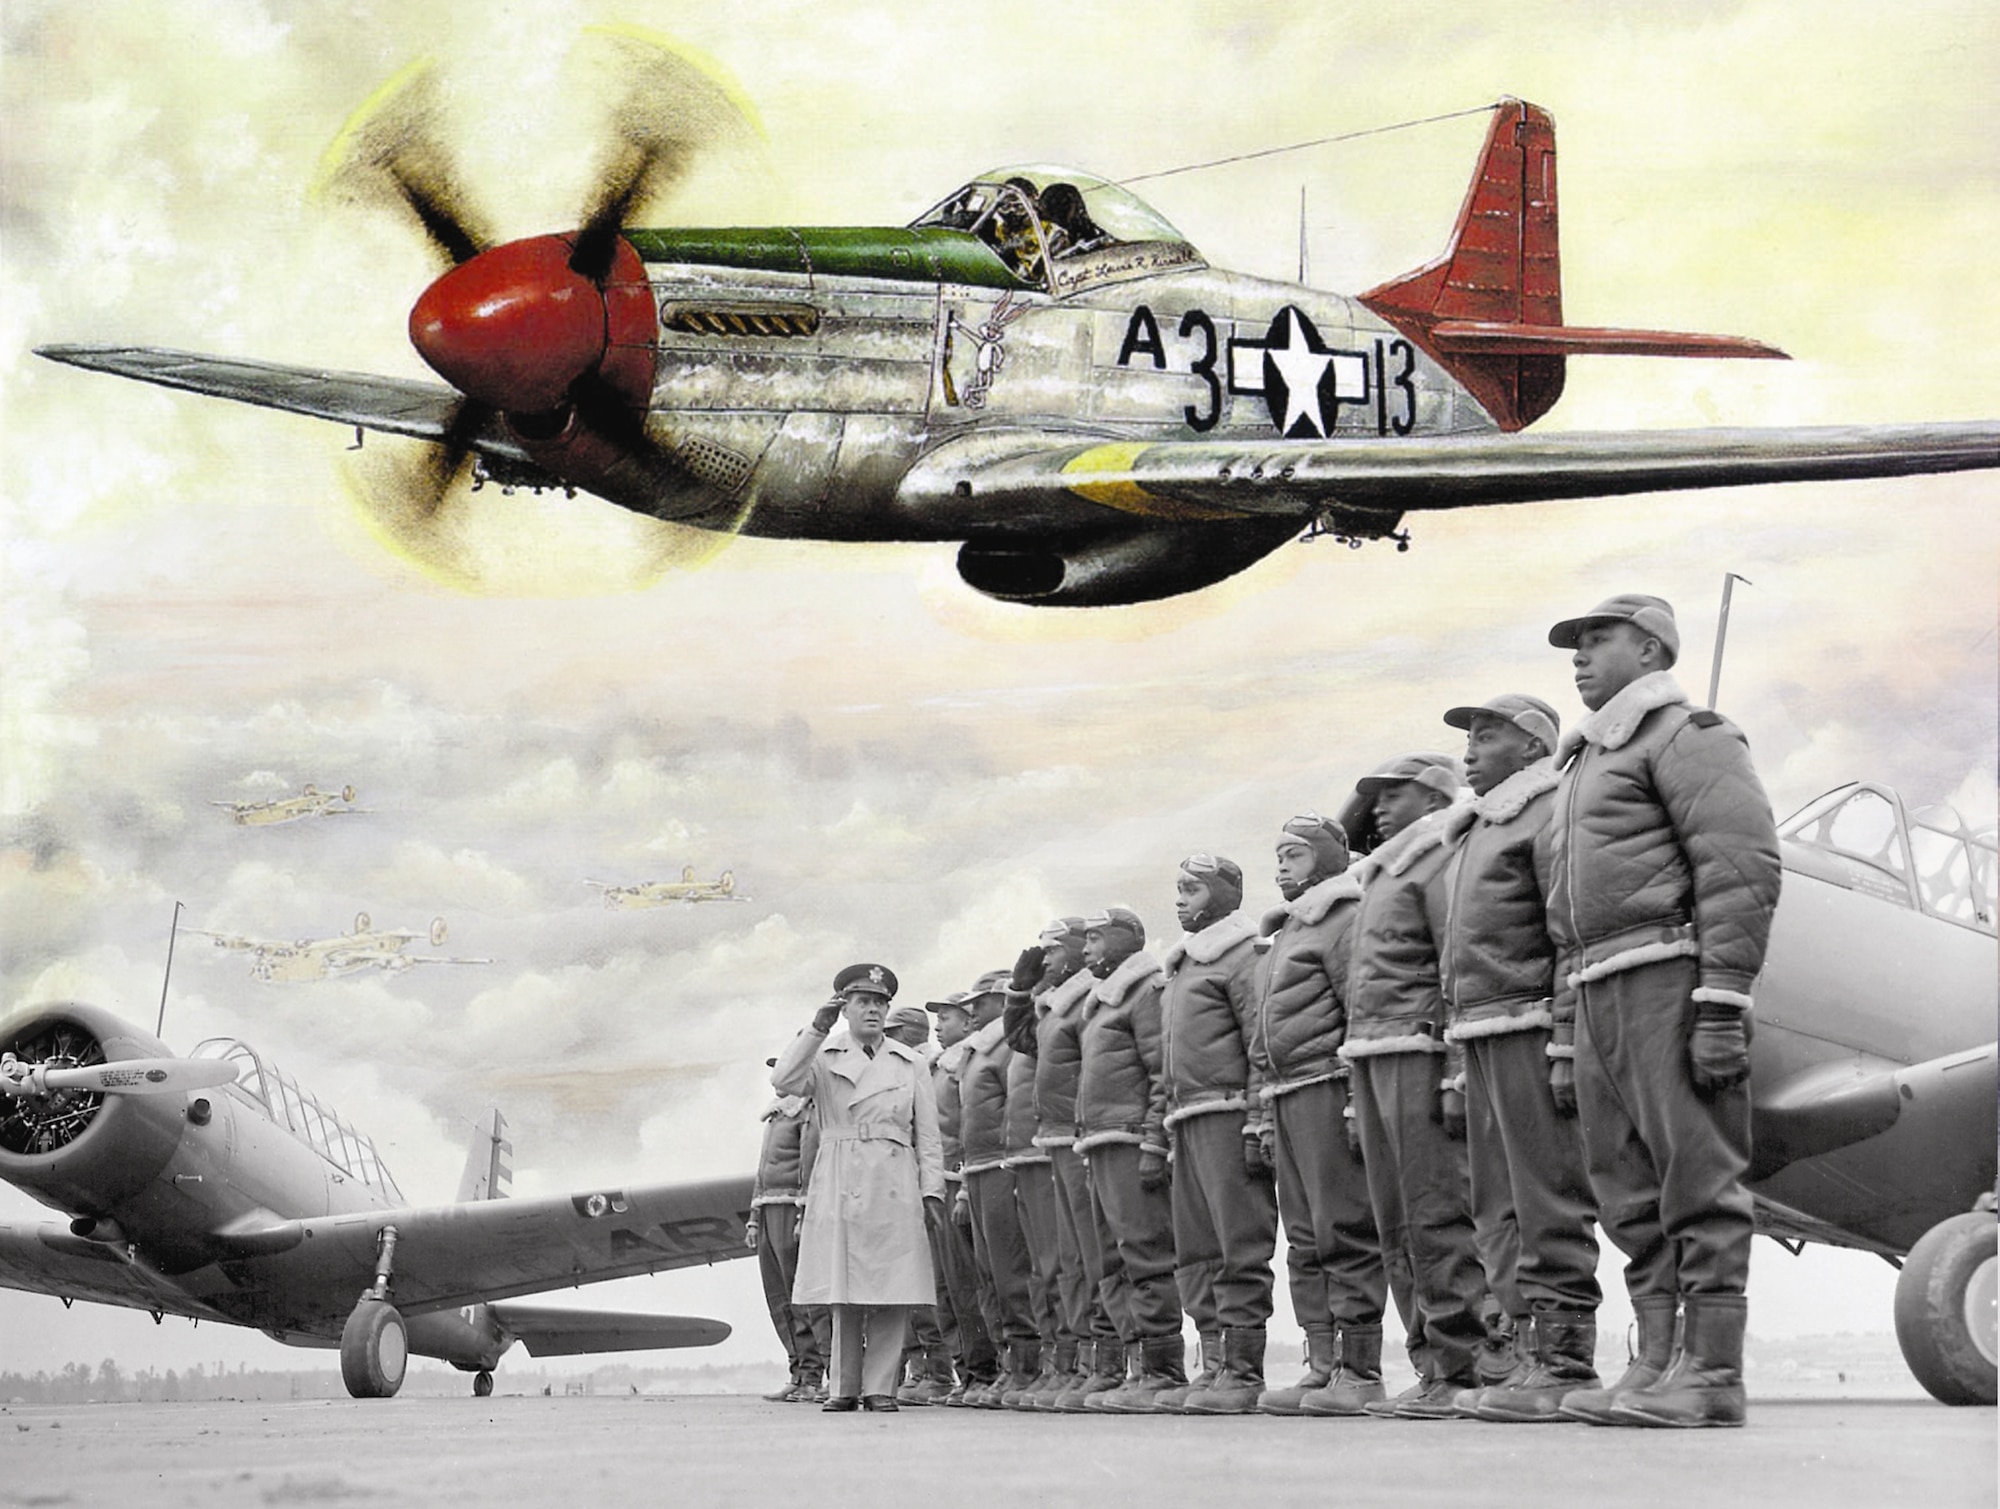 The Tuskegee Airmen were the first black Airmen to pioneer an integrated Air Force and also fought bravely in the forefront of World War II. These warriors will join the Warriors of the North at the Air Show. (Photo illustration by Clay Kraby)